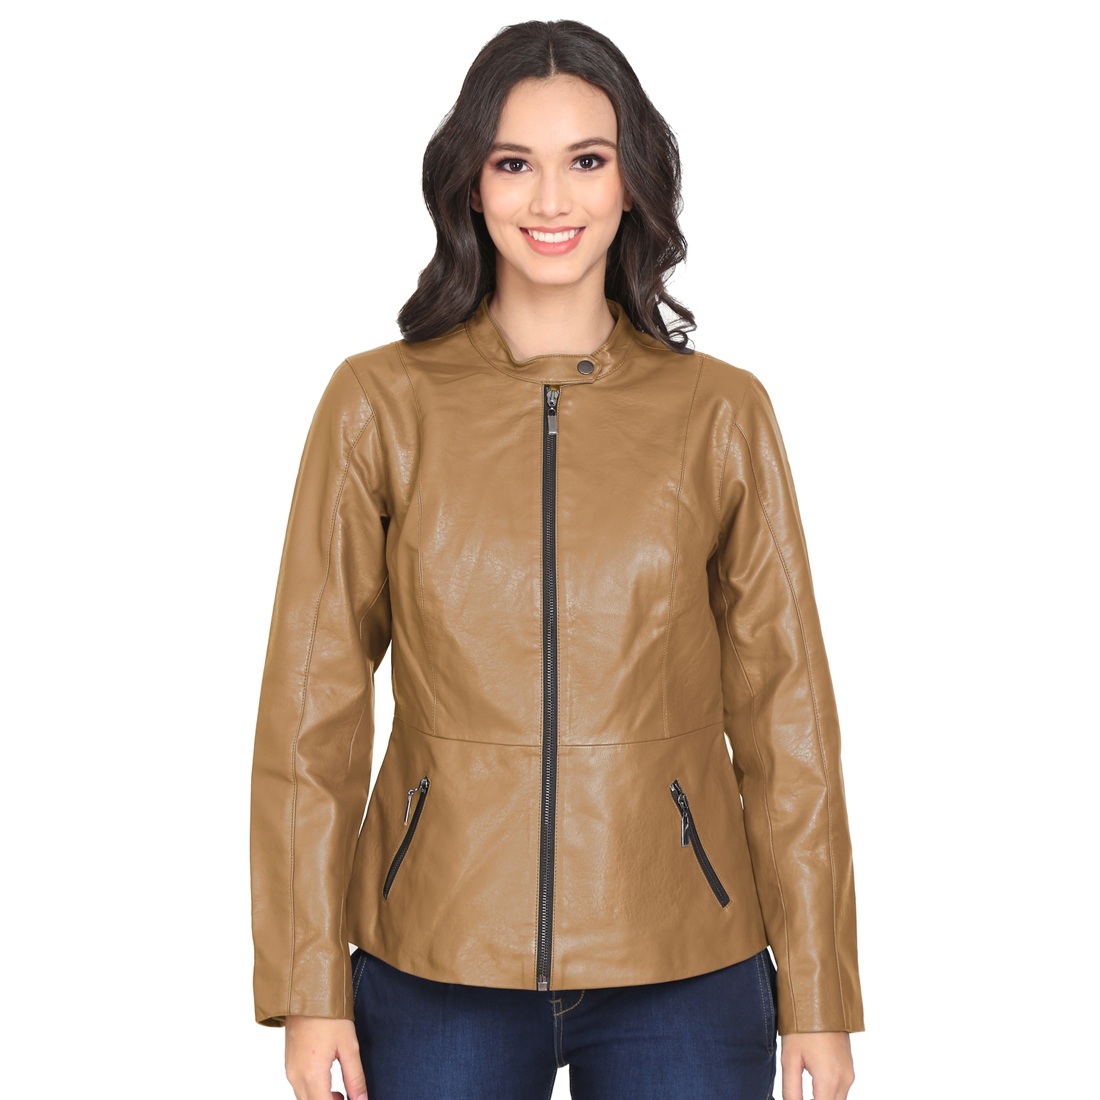 Justanned | JUSTANNED ALMOND BROWN LEATHER JACKET